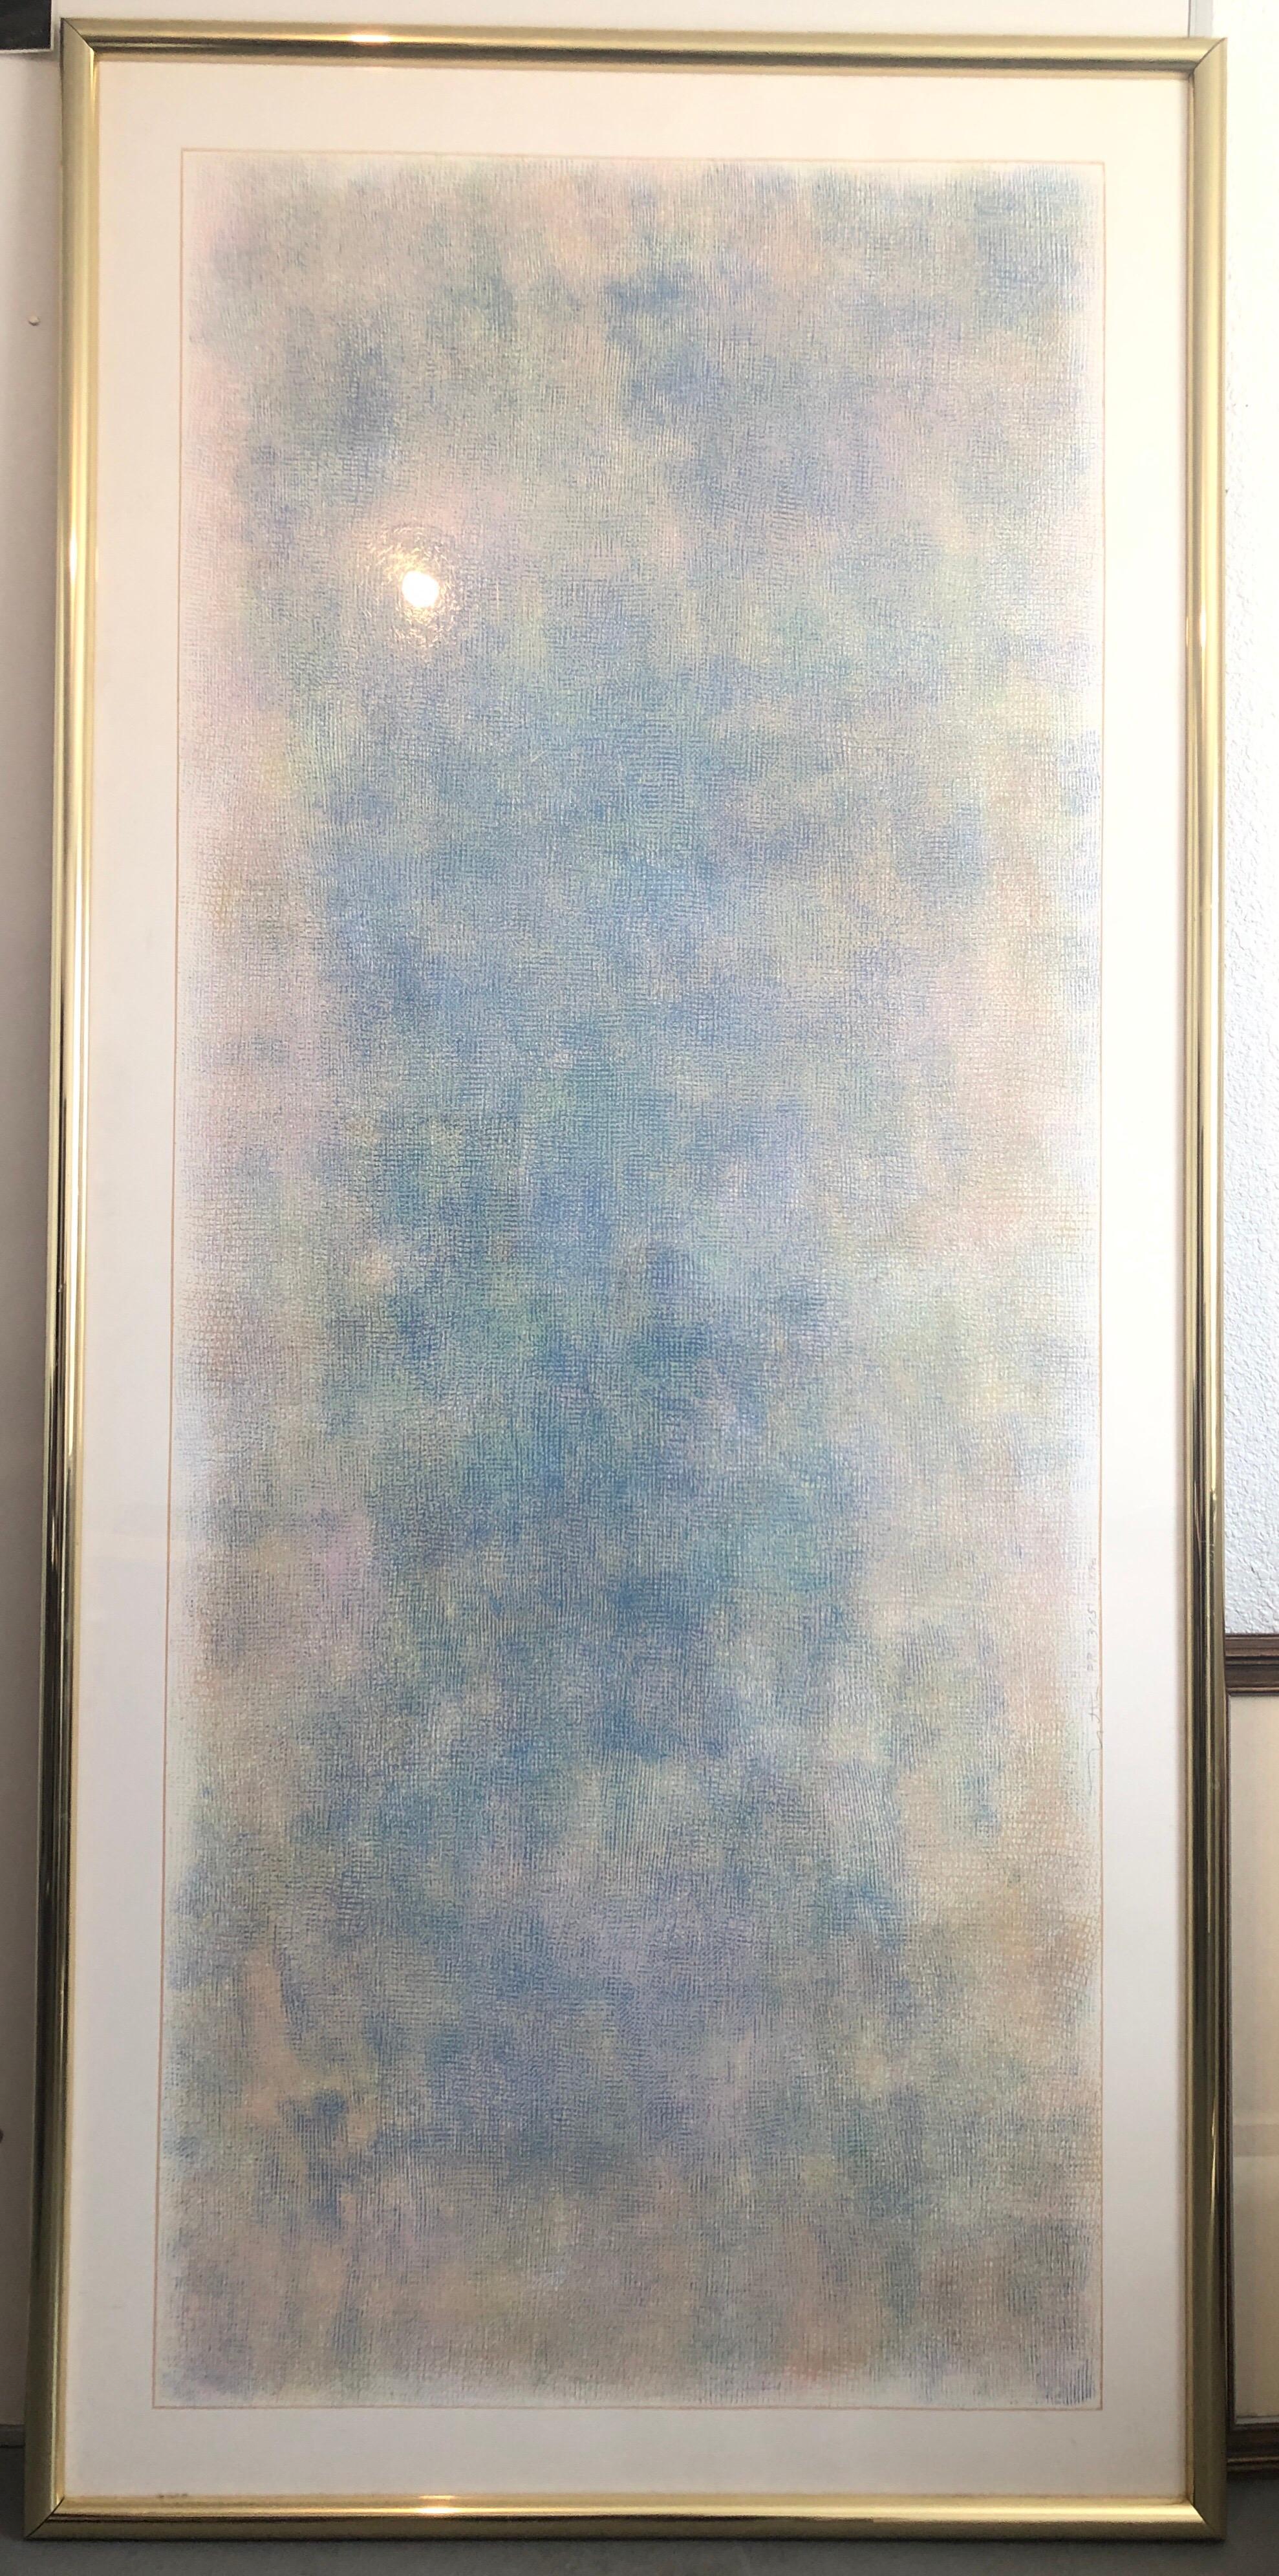 Beautiful color pastel tones. blues and pinks. In vintage gold frame.

Robert Natkin (1930-2010) was a New York artist known for his abstract expressionist paintings.
Born in 1930 in Chicago, Robert Natkin grew up in an extended Russian-Jewish